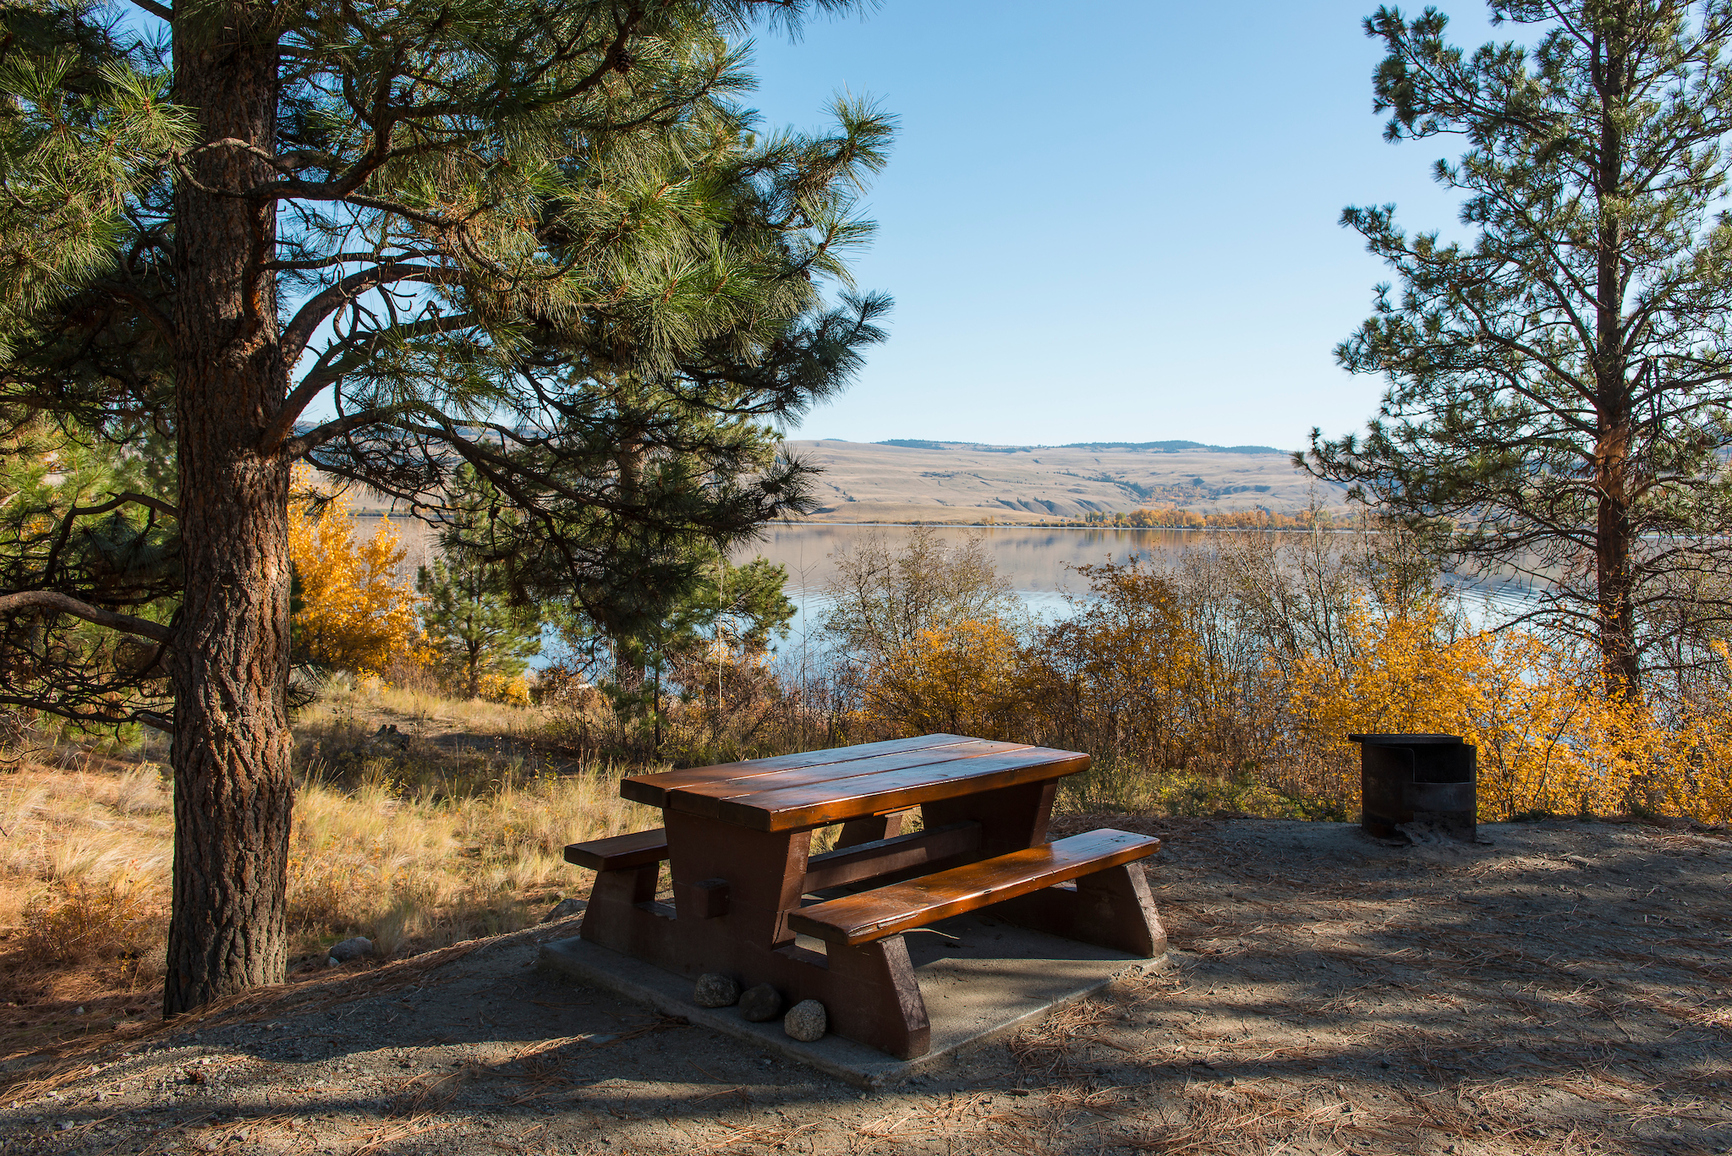 Vacant campsite with lake and grassy rolling hills view.